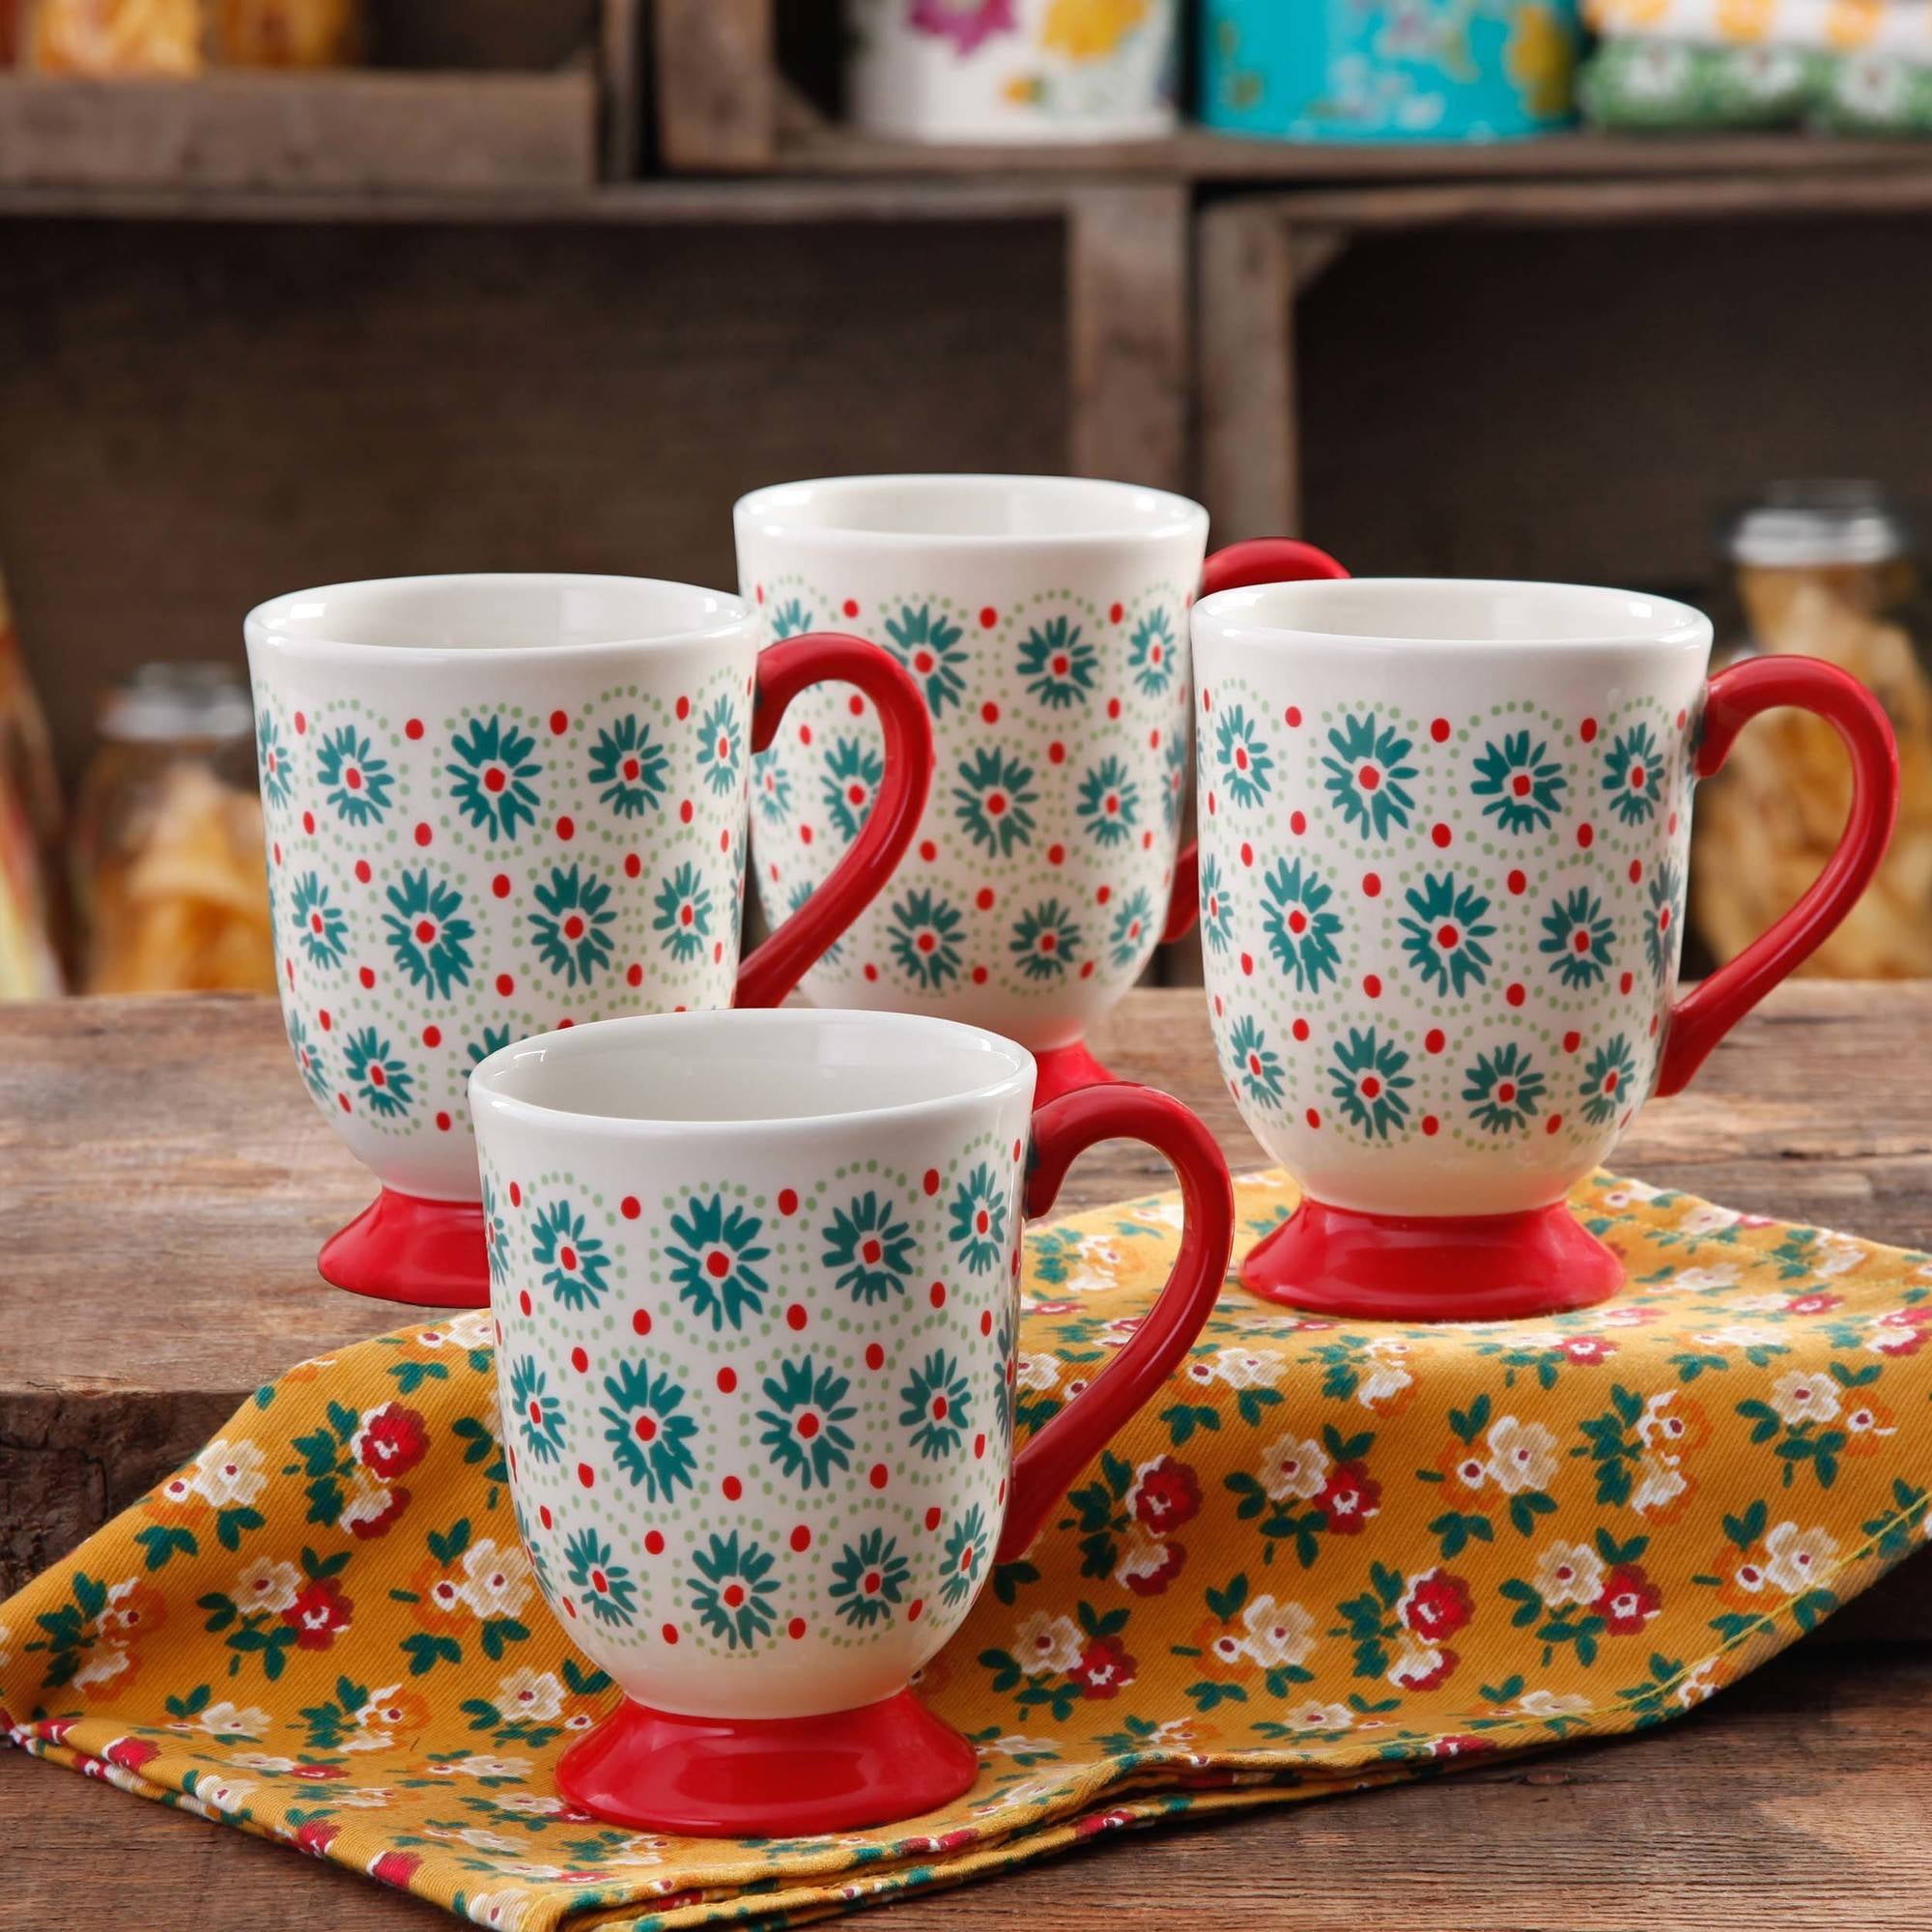 The Pioneer Woman Collection (@thepioneerwomancollection